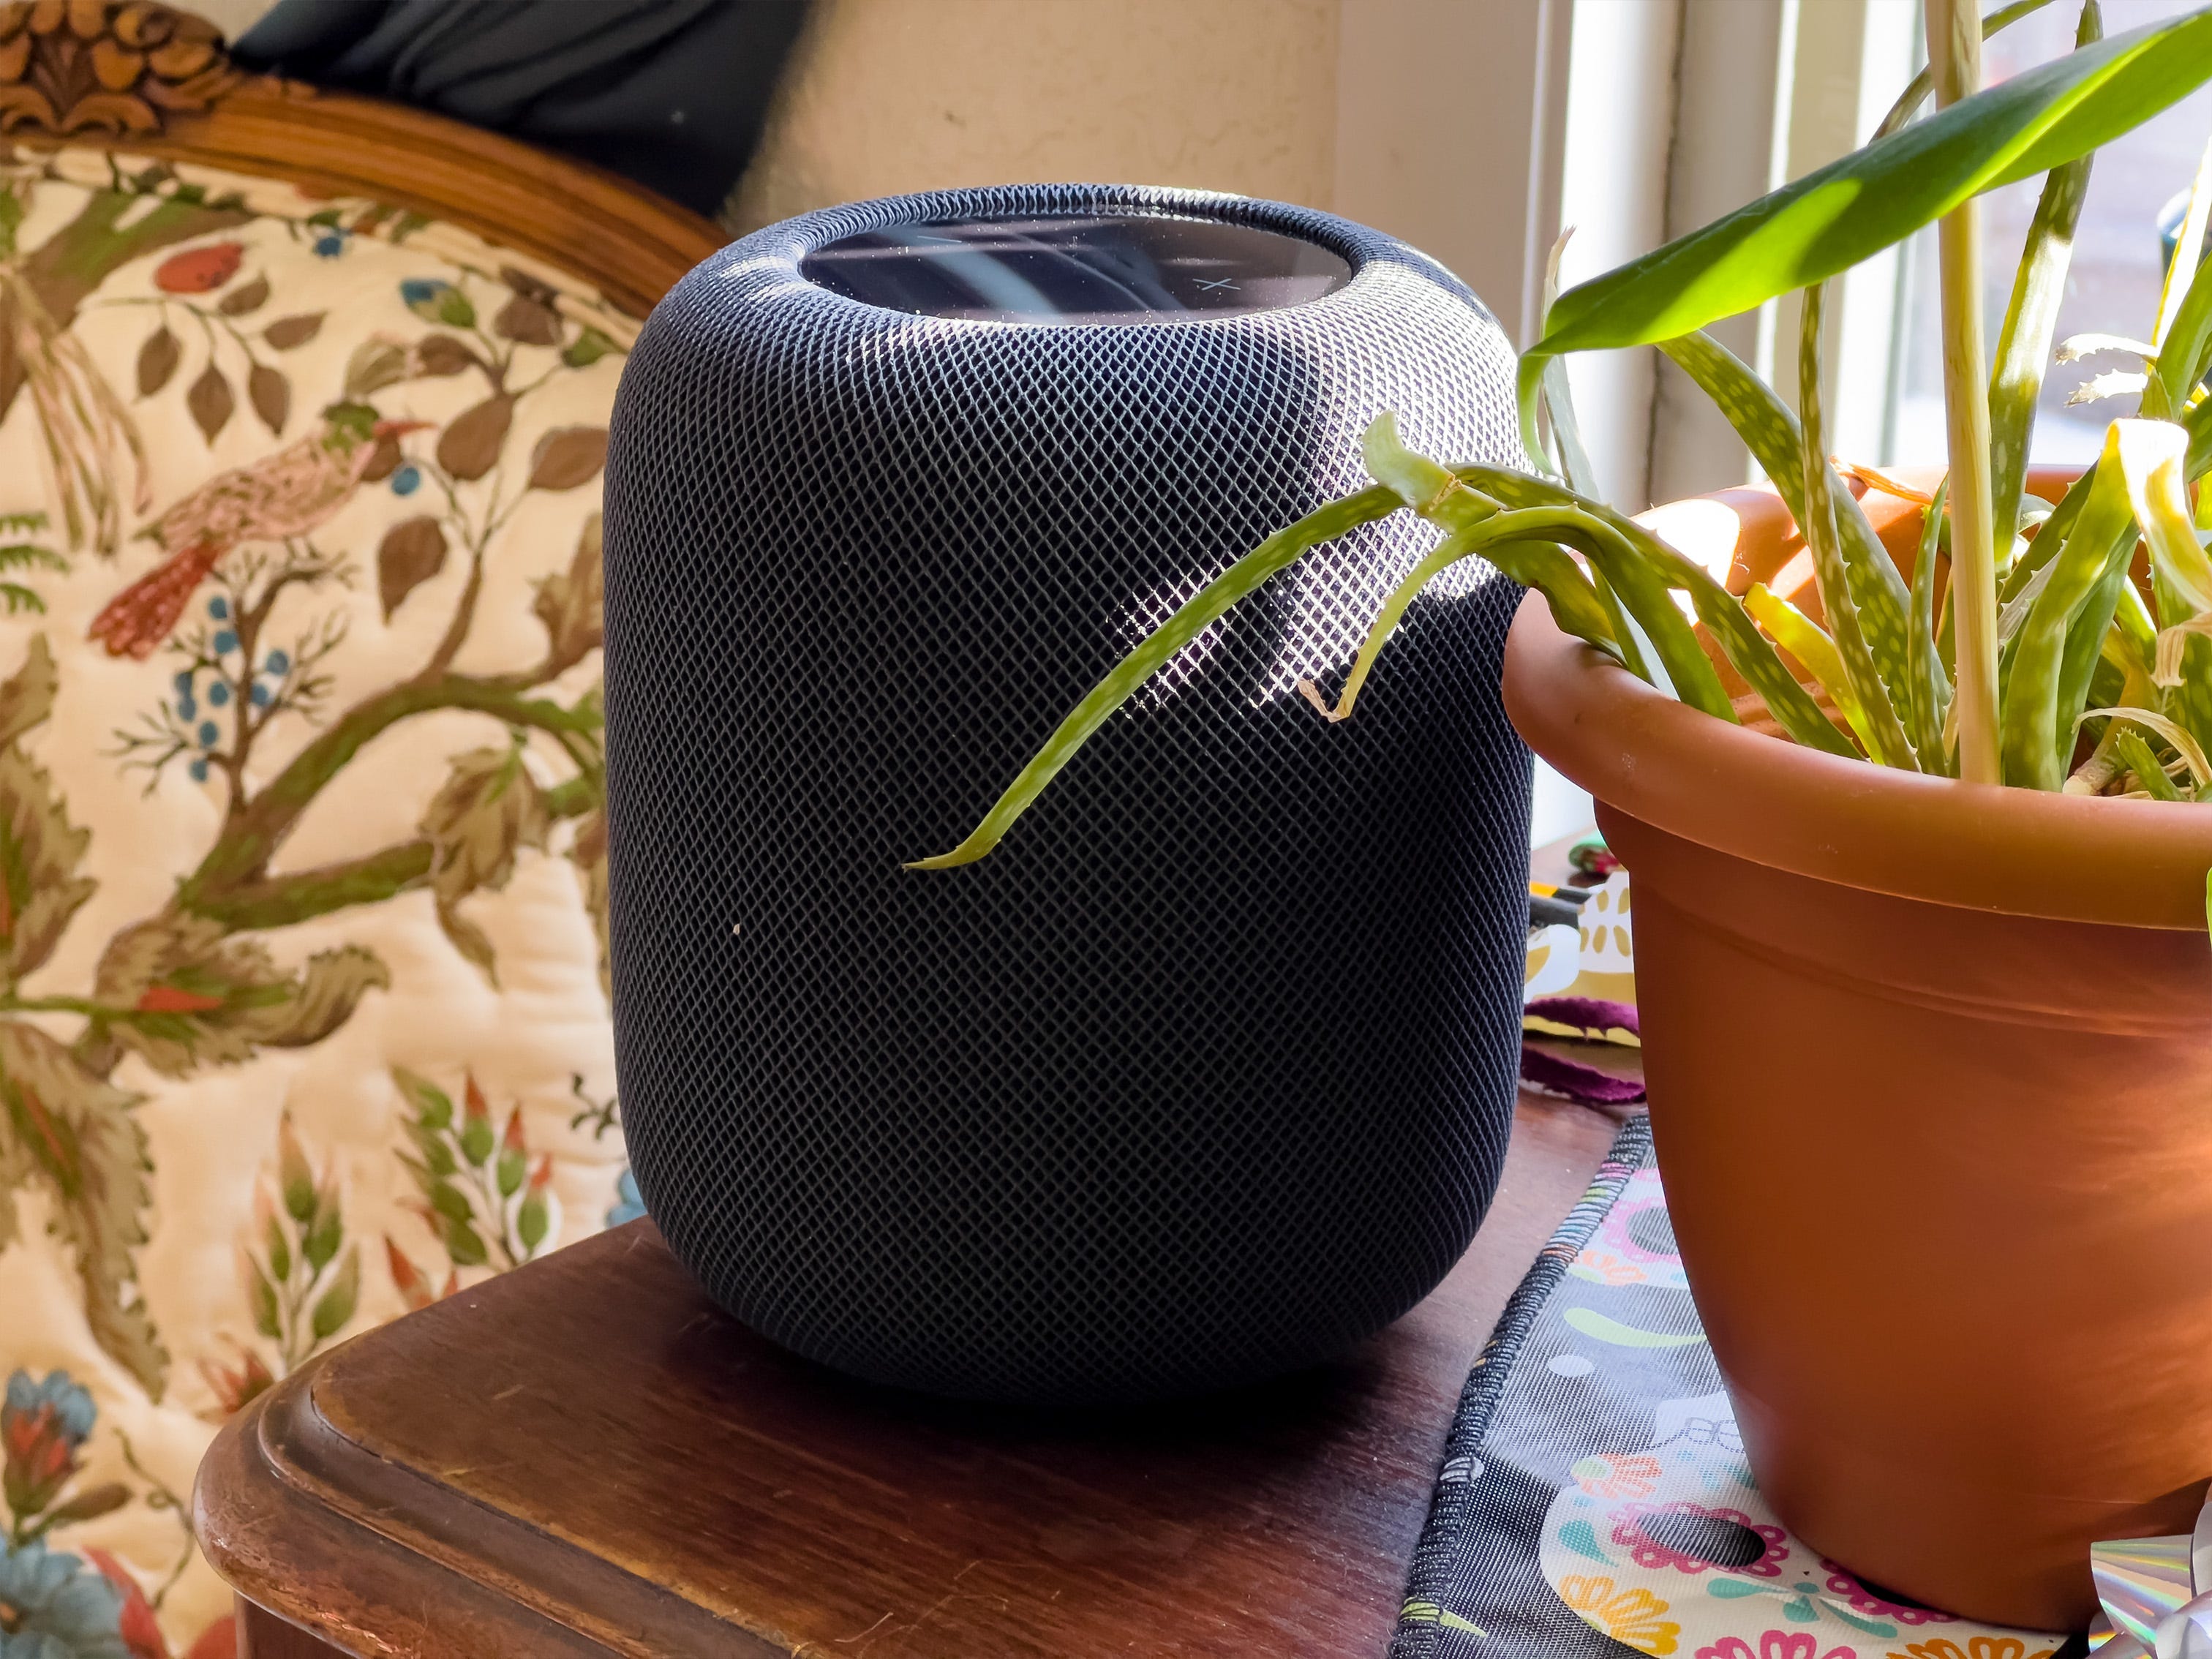 Hands on Review of the Apple HomePod 2 - Good e-Reader